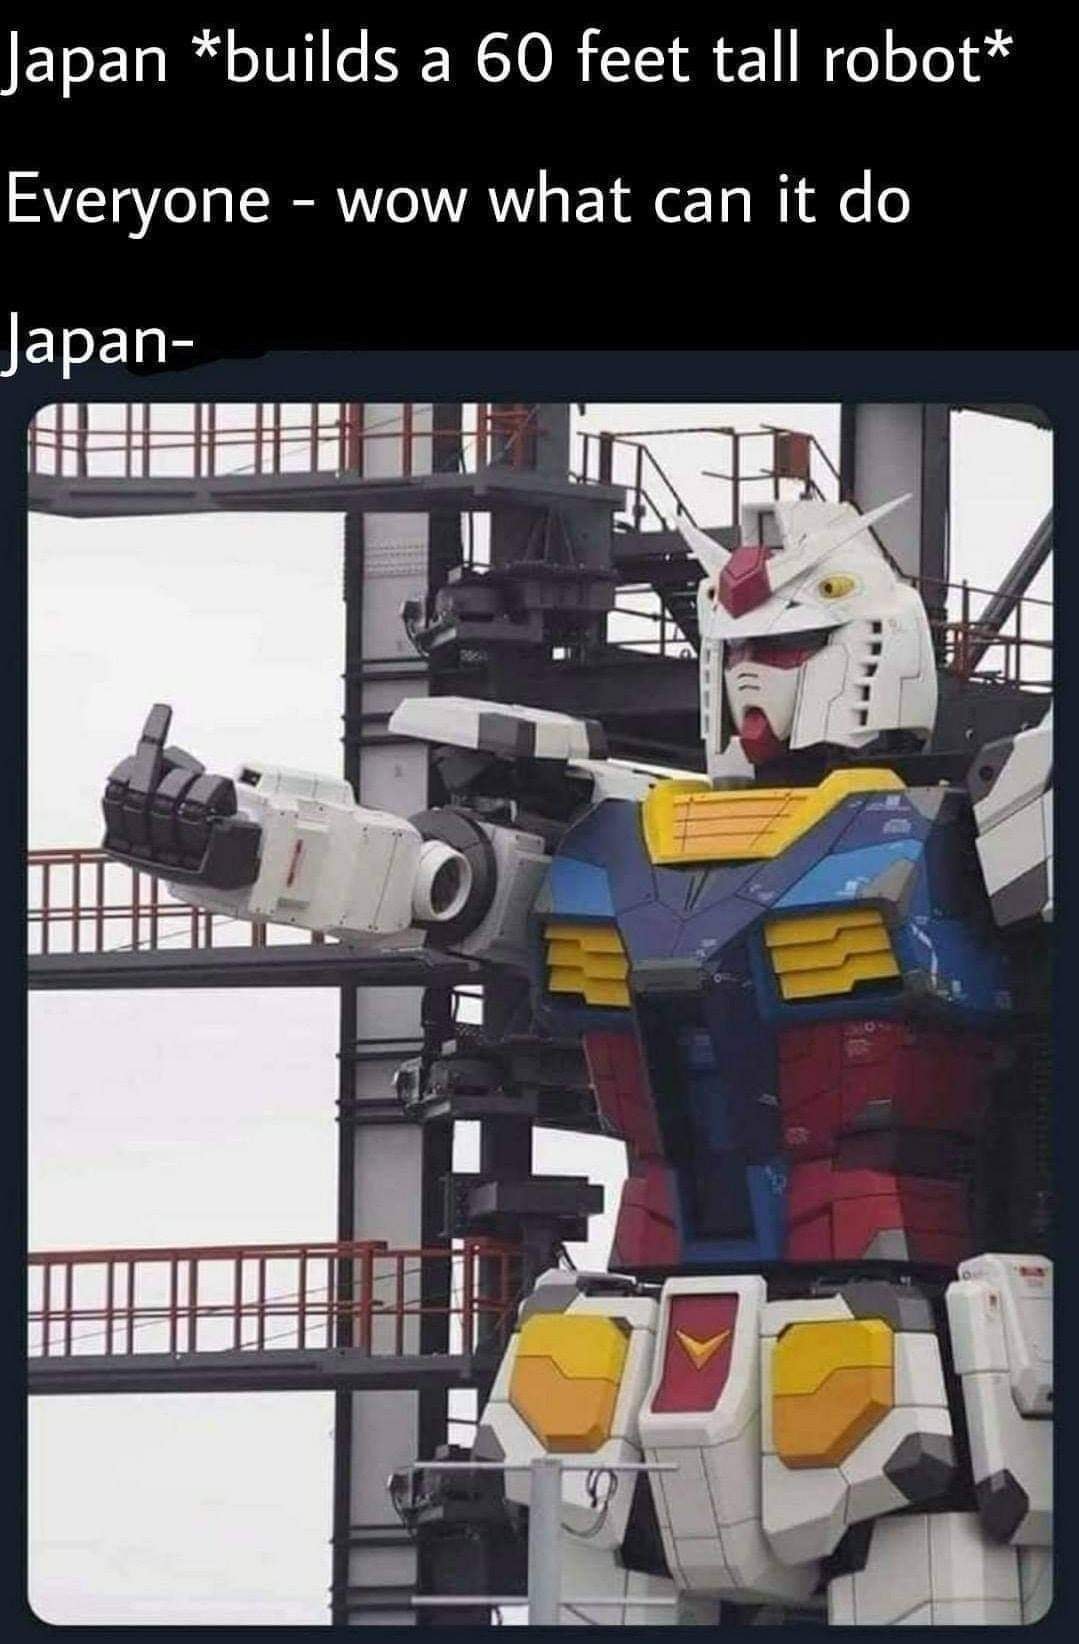 monday morning randomness - giant gundam middle finger - Japan builds a 60 feet tall robot Everyone wow what can it do w Japan # planoomasHR